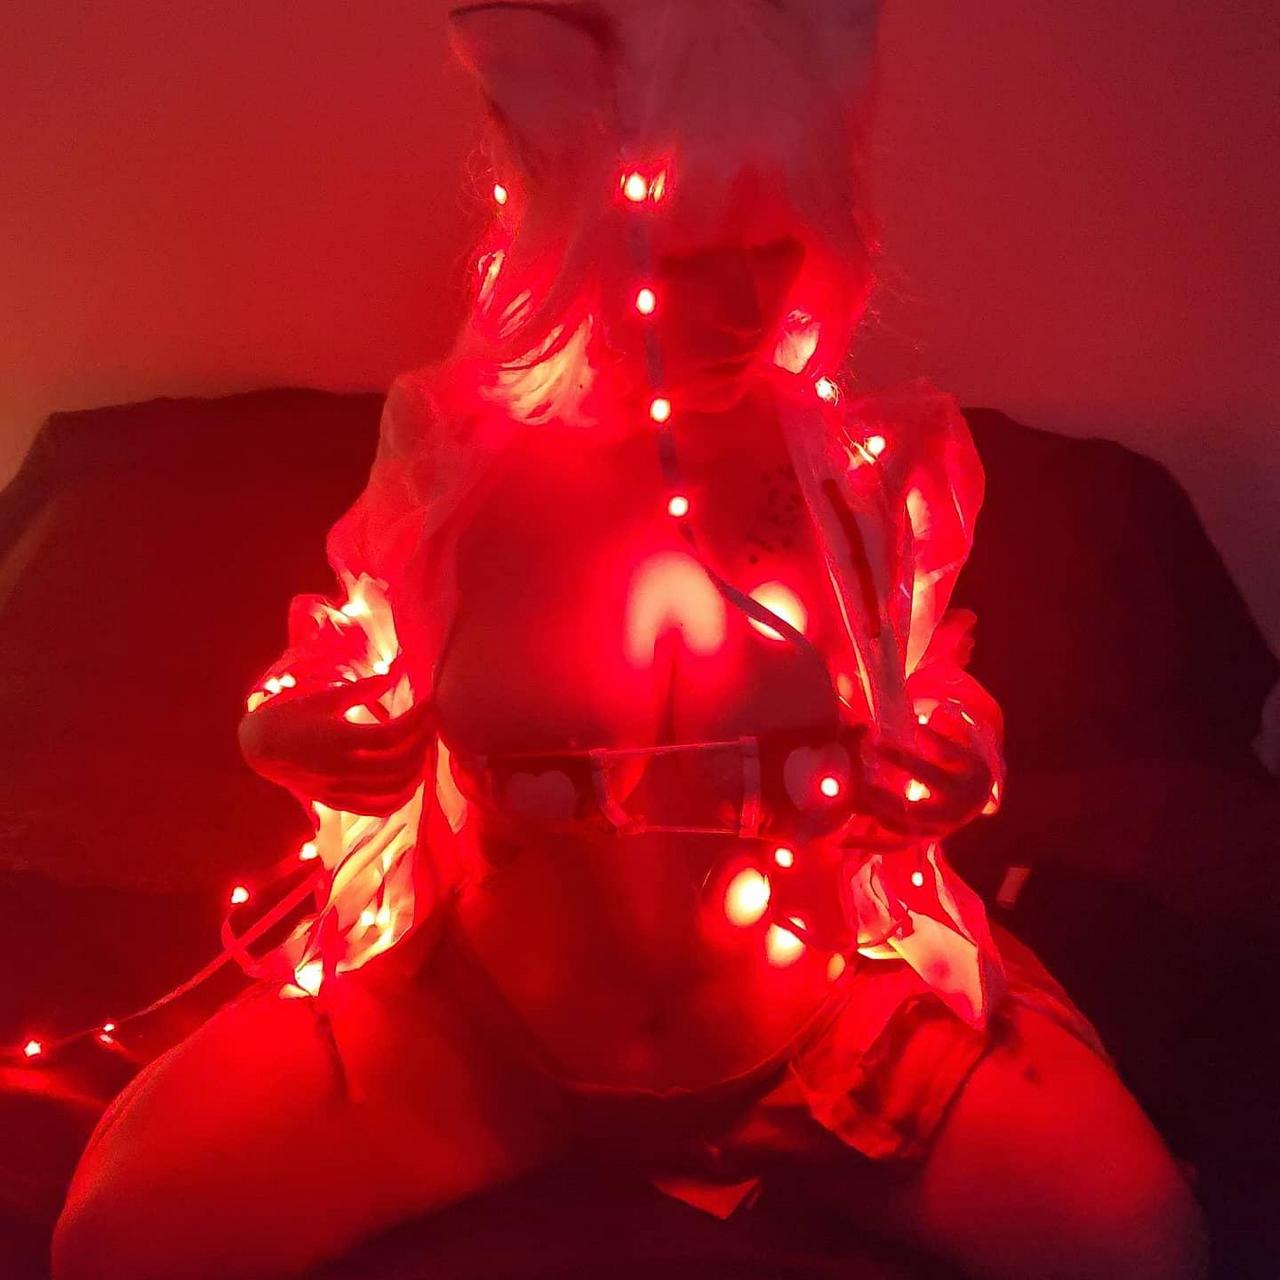 I Played With Some New Fairy Lights Self Bebe I Love To Play Ny